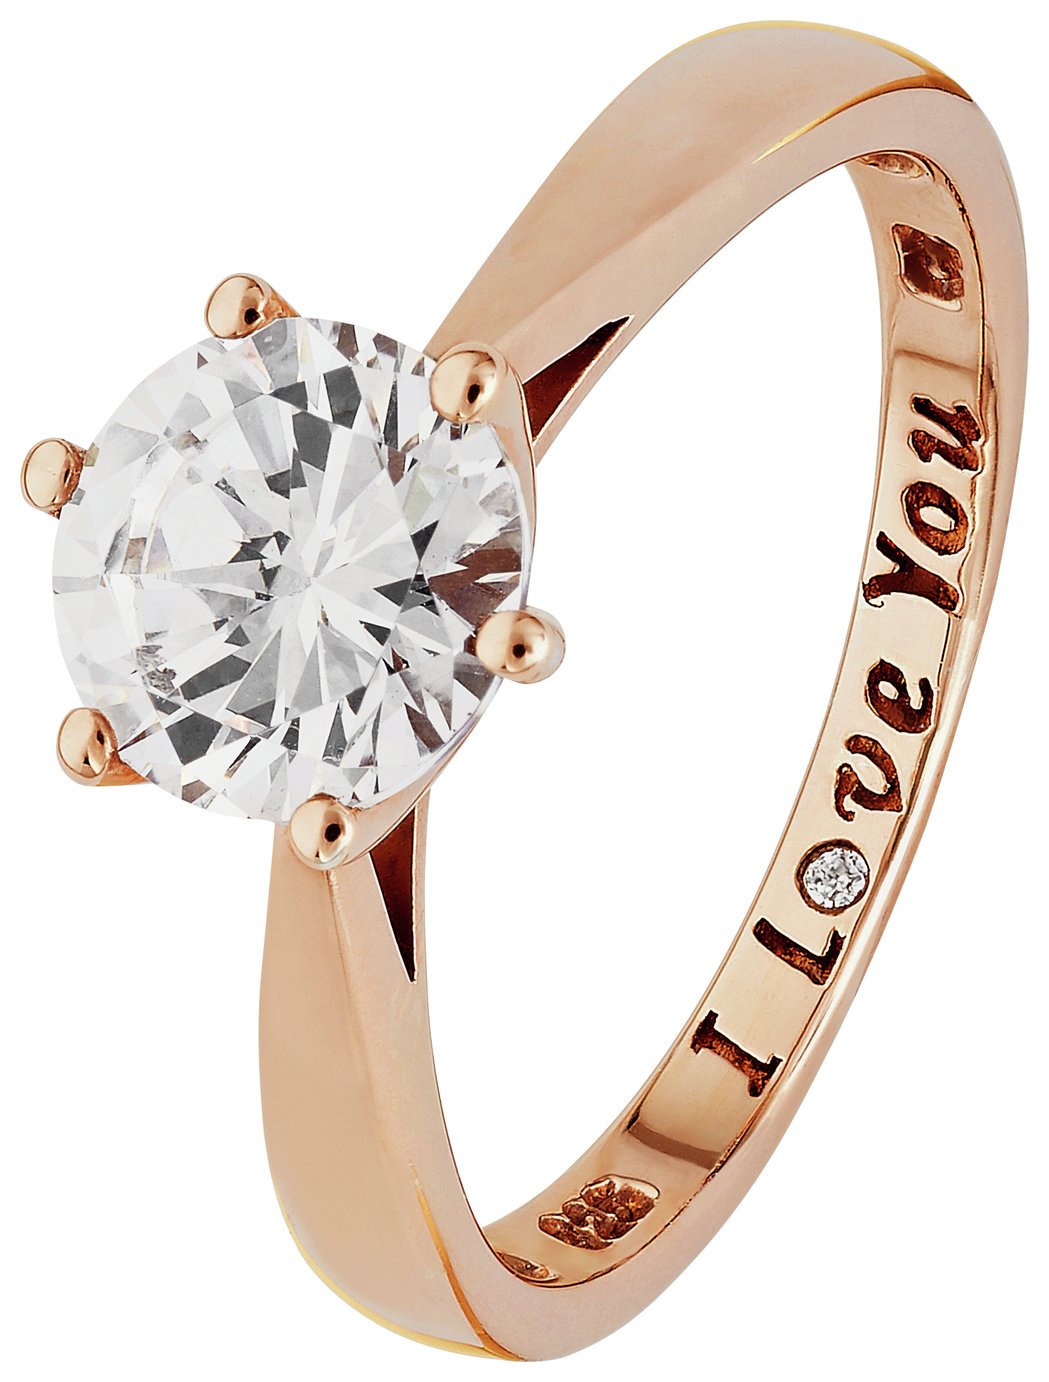 Revere 9ct Rose Gold Plated Silver 'I Love You' Ring